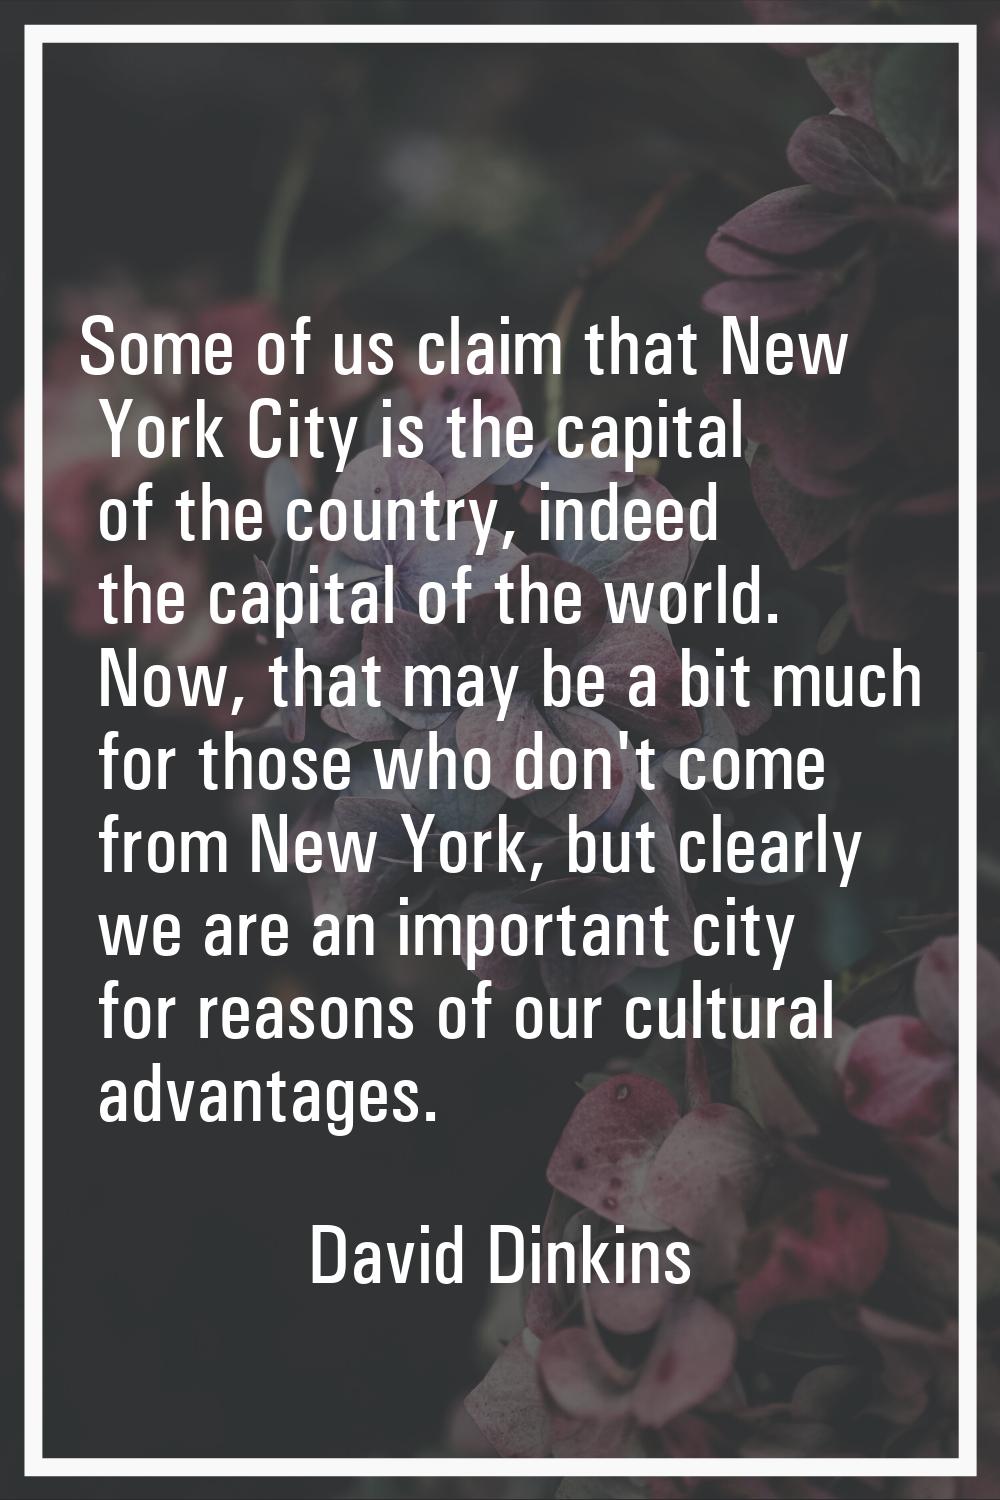 Some of us claim that New York City is the capital of the country, indeed the capital of the world.